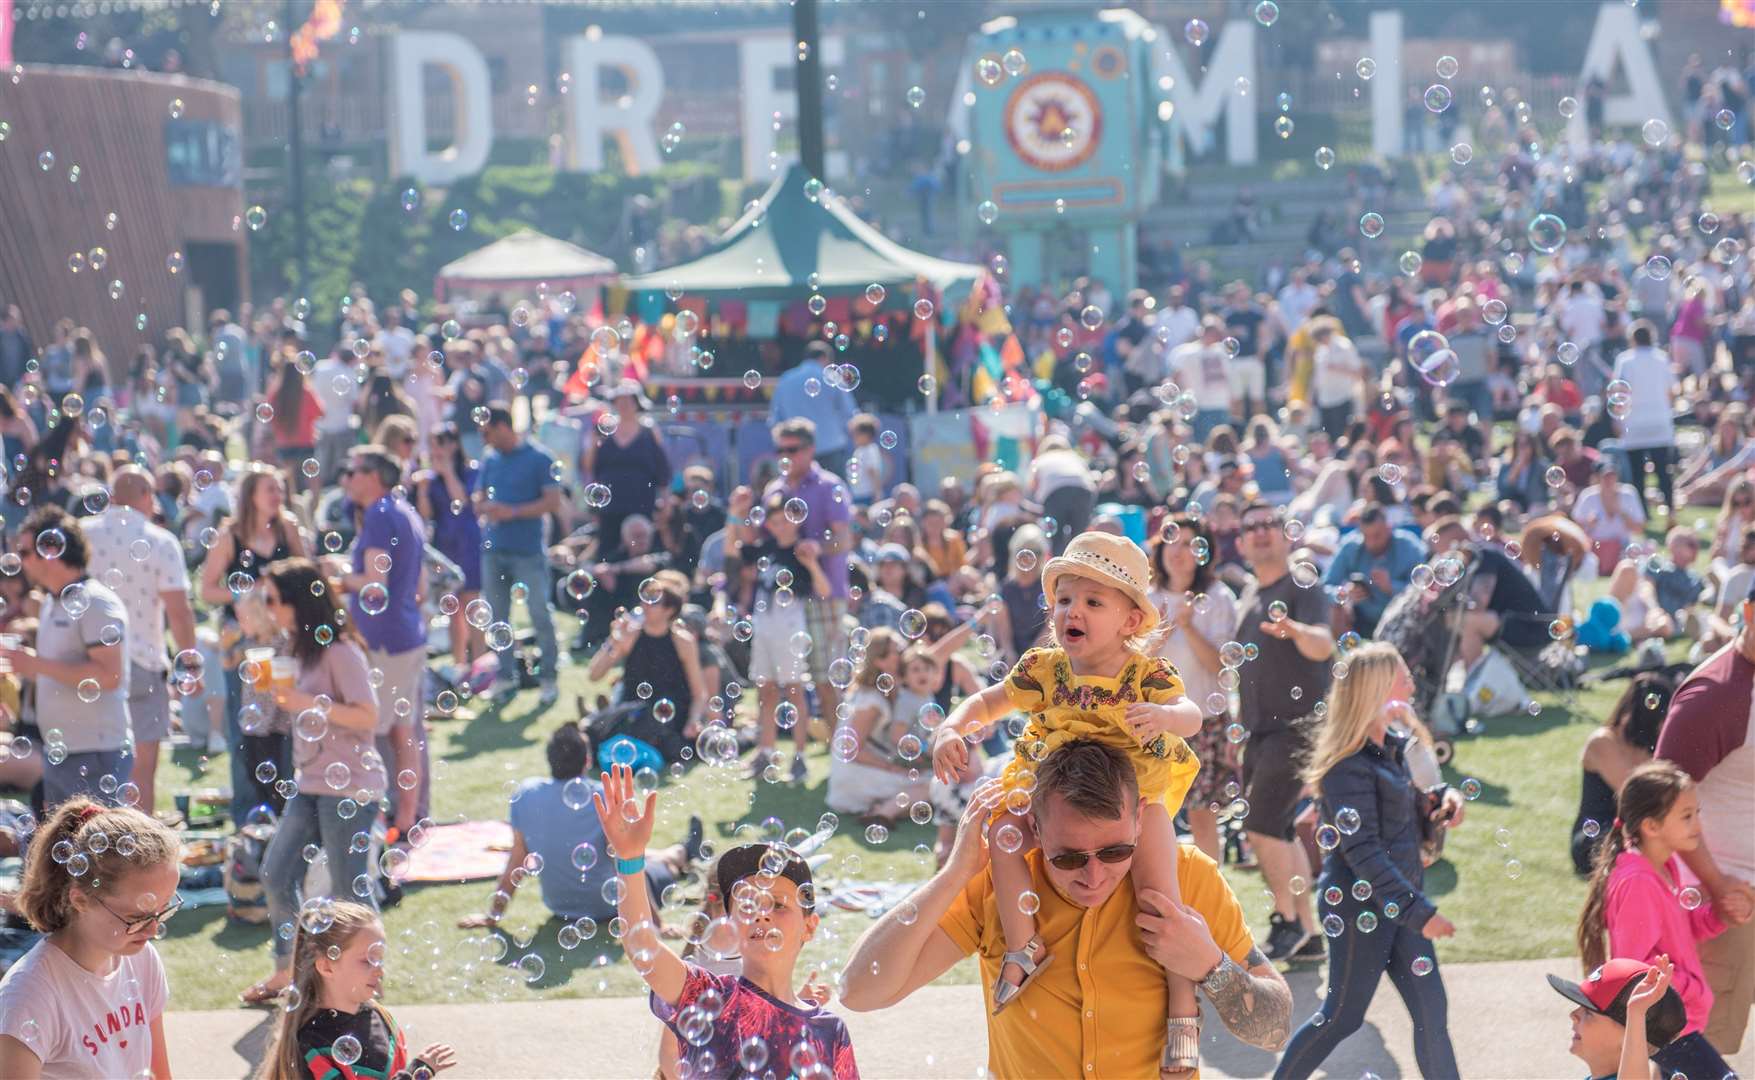 The Camp Bestival takeover at Dreamland